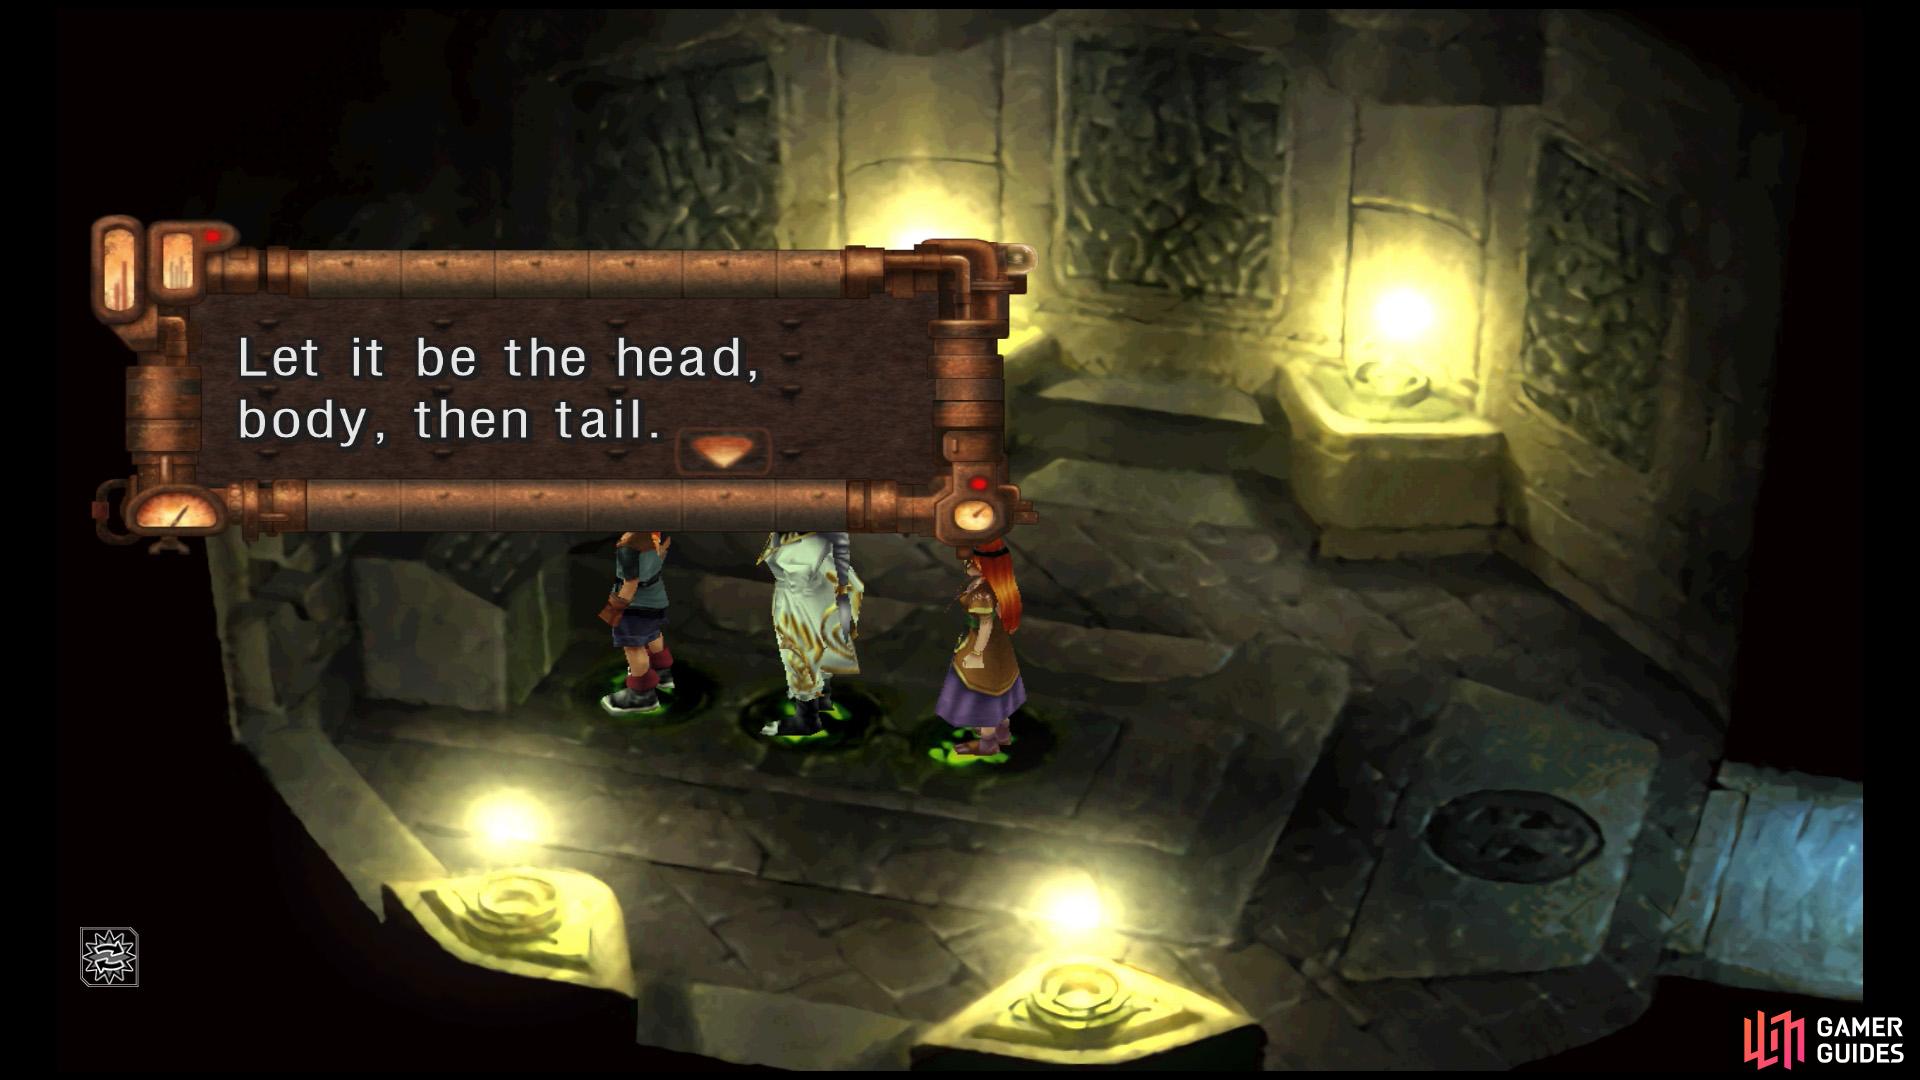 Next, press Select once to cycle your party members to get this order: head, body and tail.